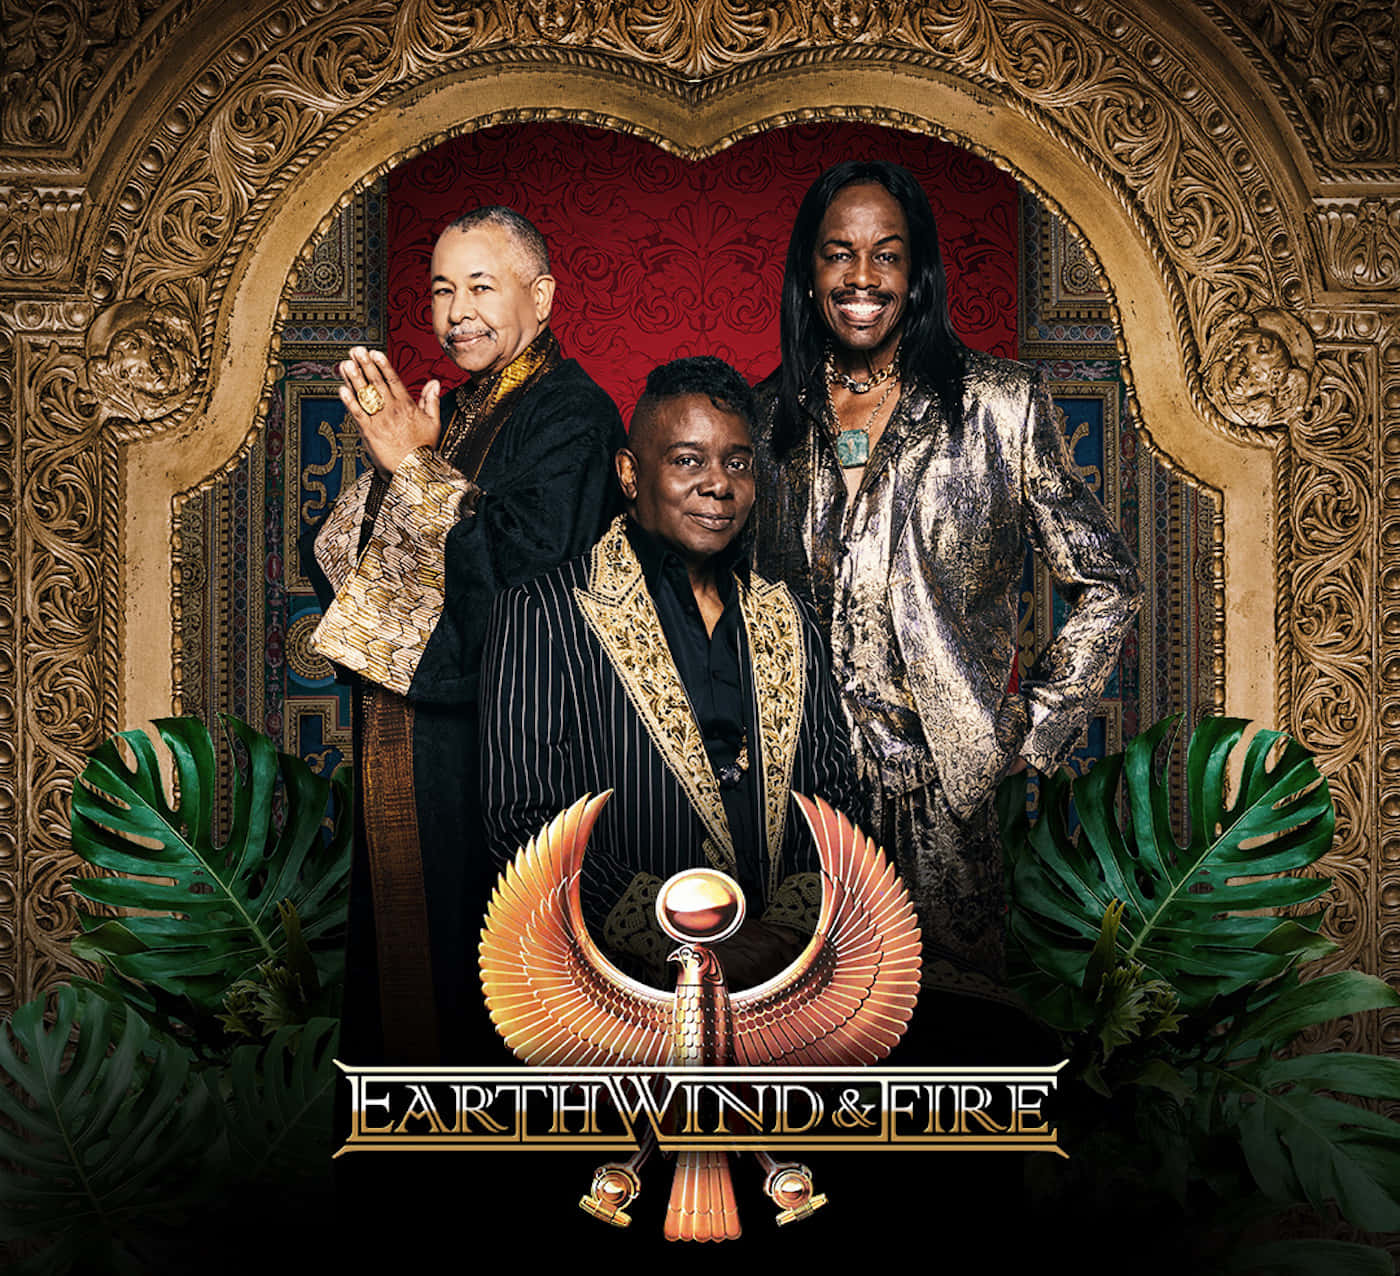 Earth, Wind&Fire Performing Live At A Concert Wallpaper